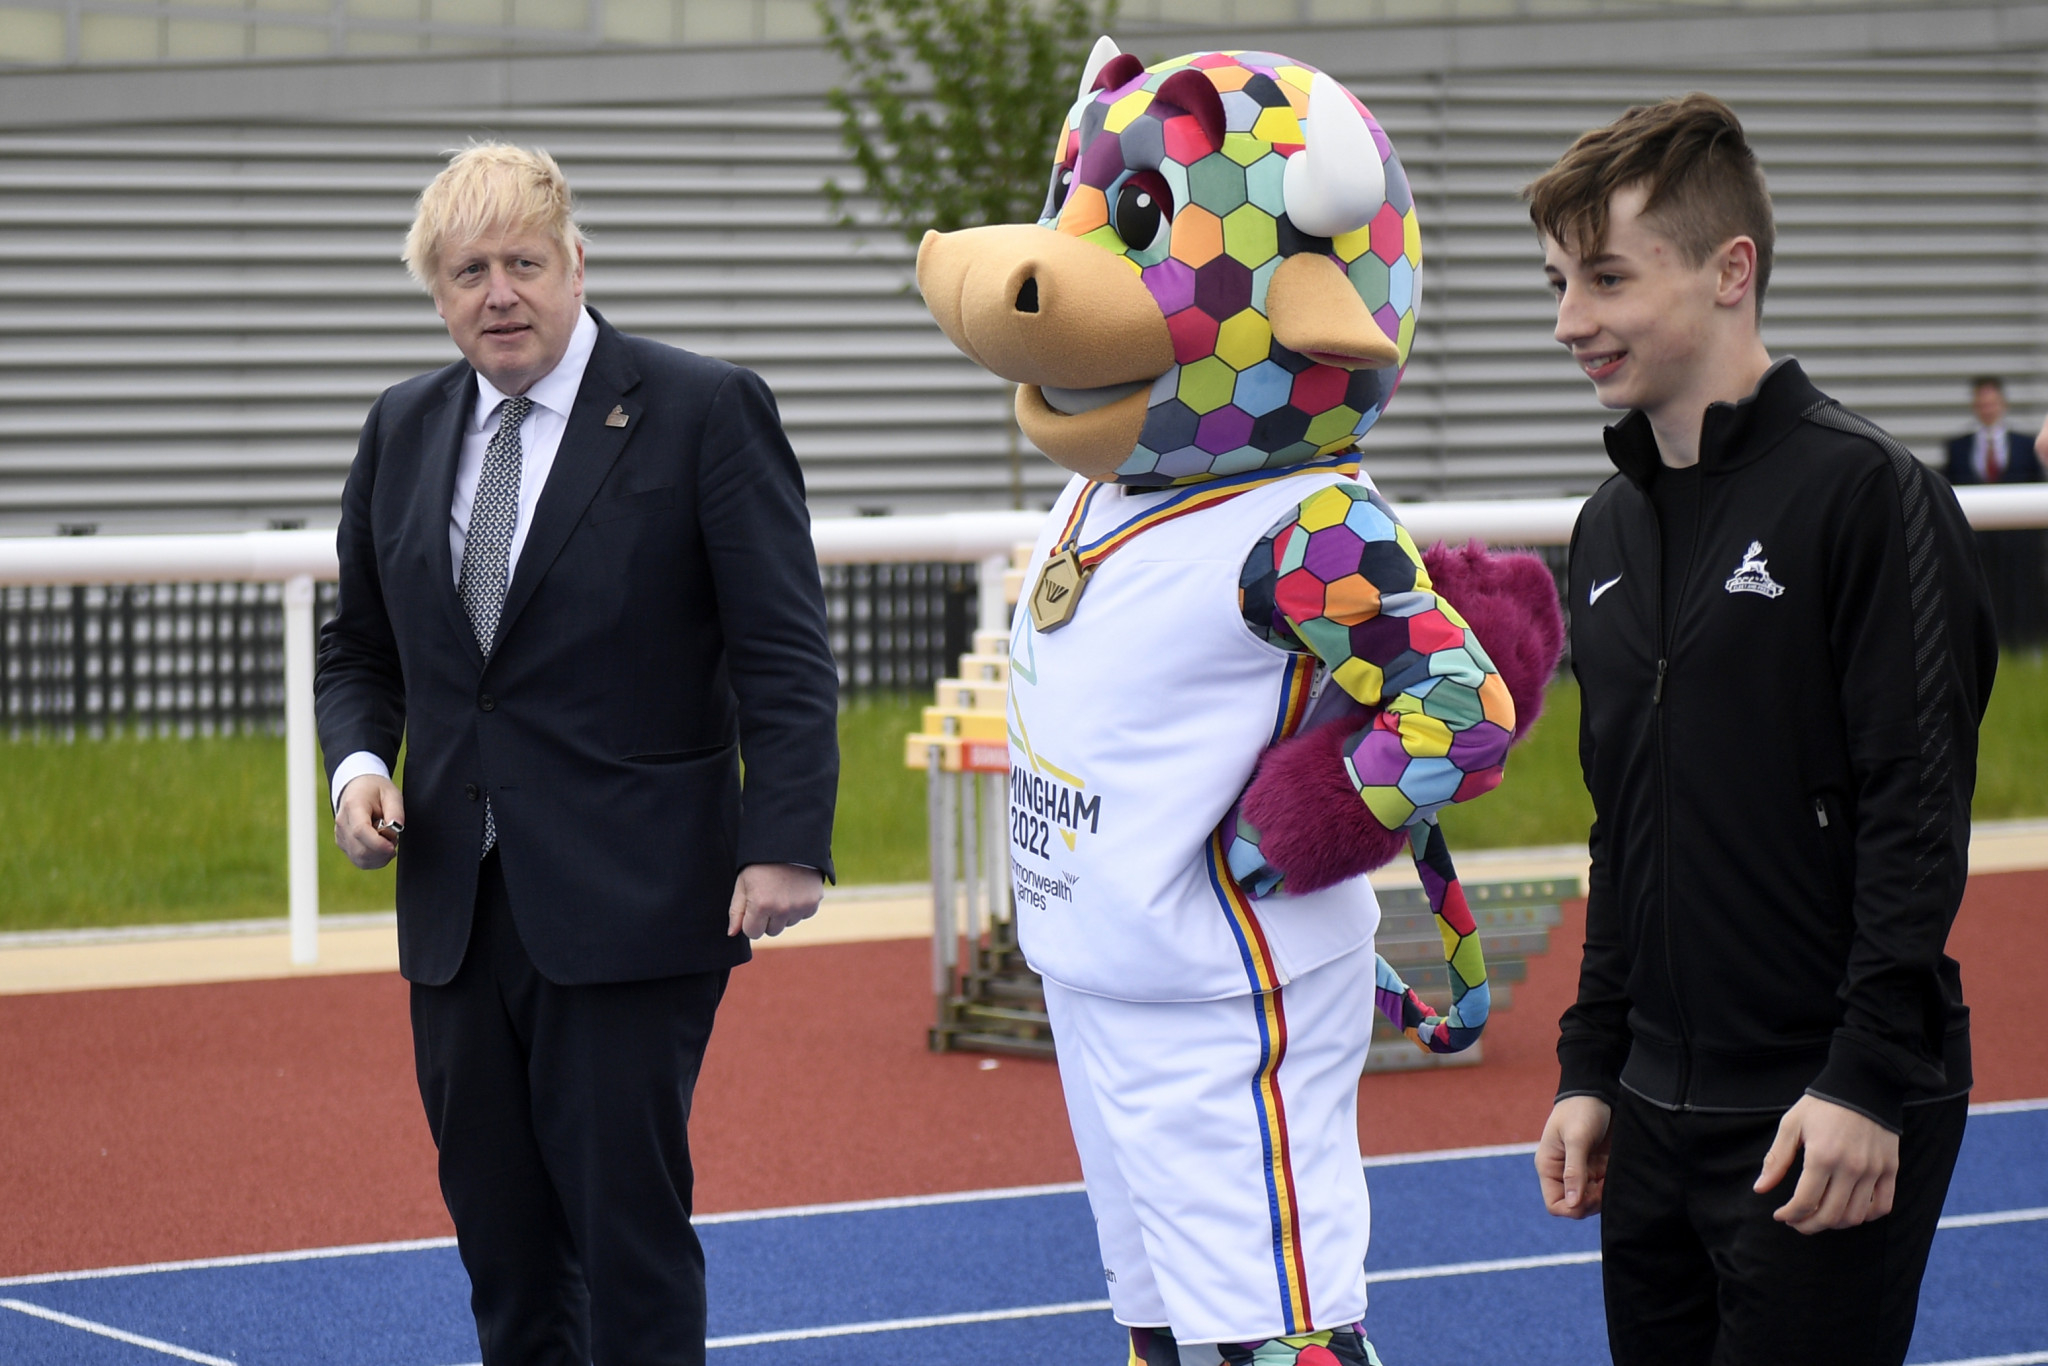 Boris Johnson had visited Alexander Stadium, the venue for the Opening and Closing Ceremonies and athletics during the Commonwealth Games, in May and met the Birmingham 2022 mascot Perry ©Getty Images